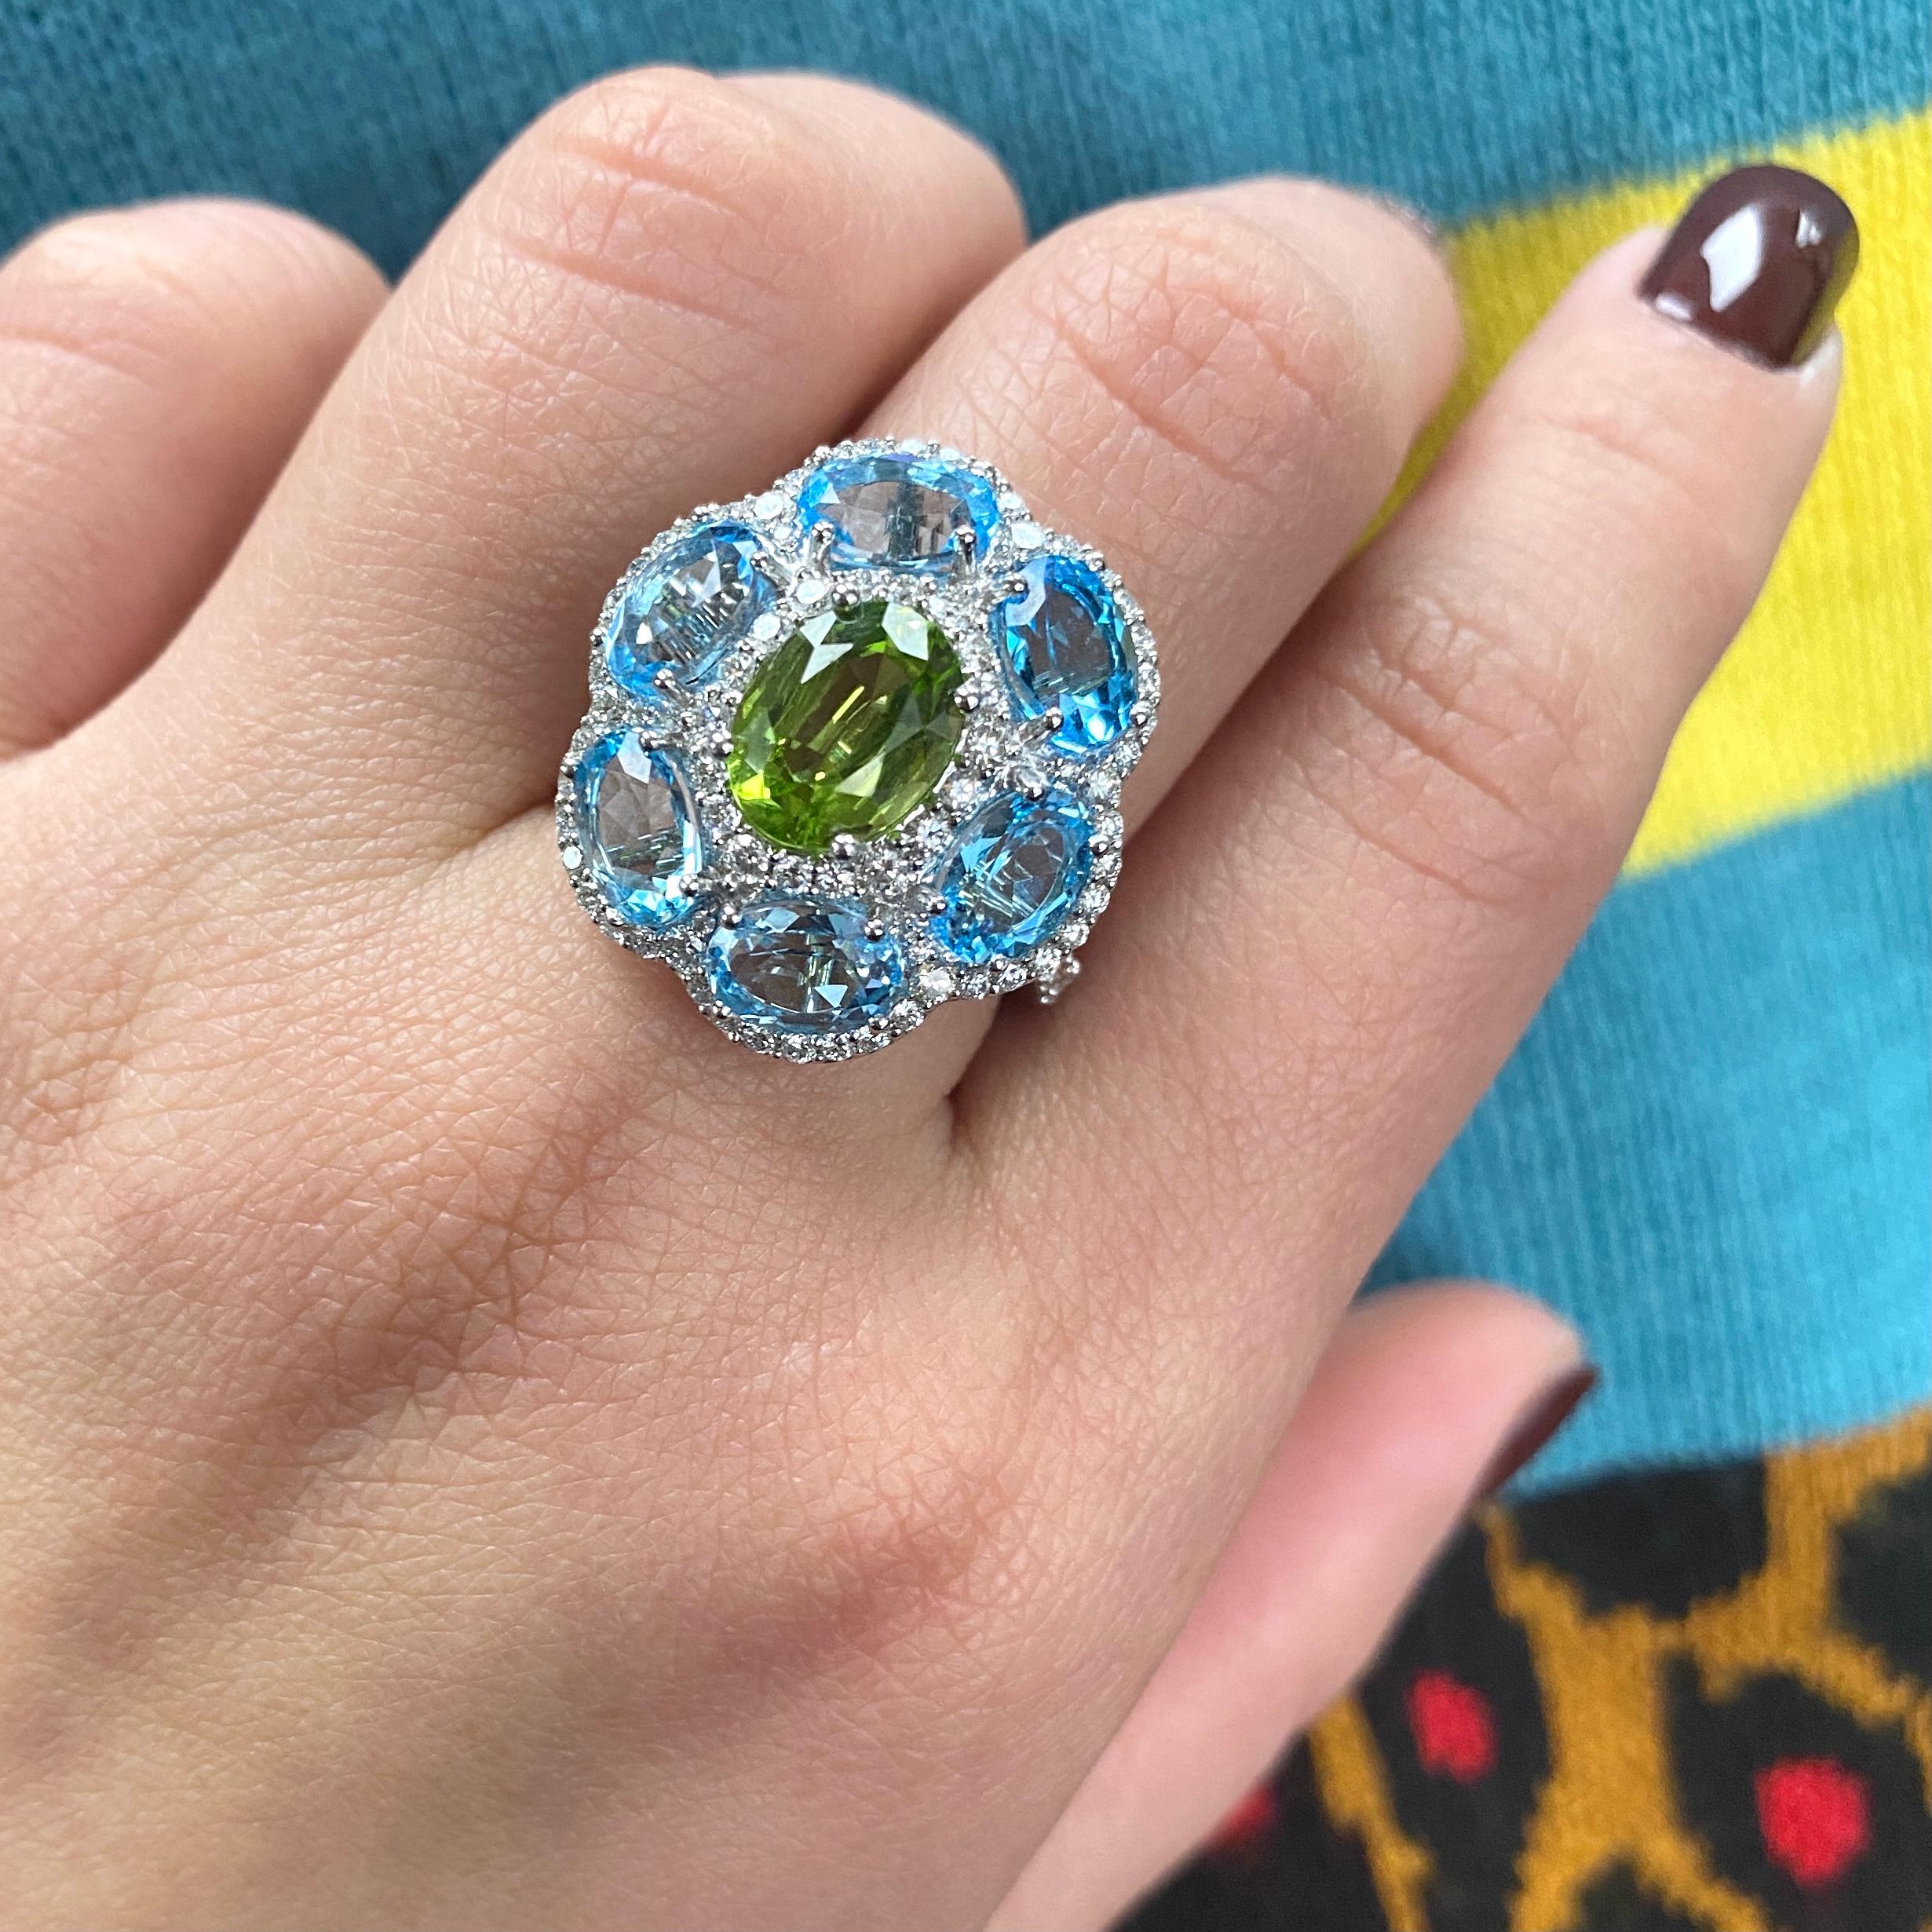 Blue Topaz and Peridot Ring in 18K White Gold from 'Gossip' Collection

Approx. gemstone Wt: 2.16 Carats (Peridot); 6.05 Carats (Blue Topaz) 

Diamonds: G-H / VS, Approx. Wt: 1.00 Carats 